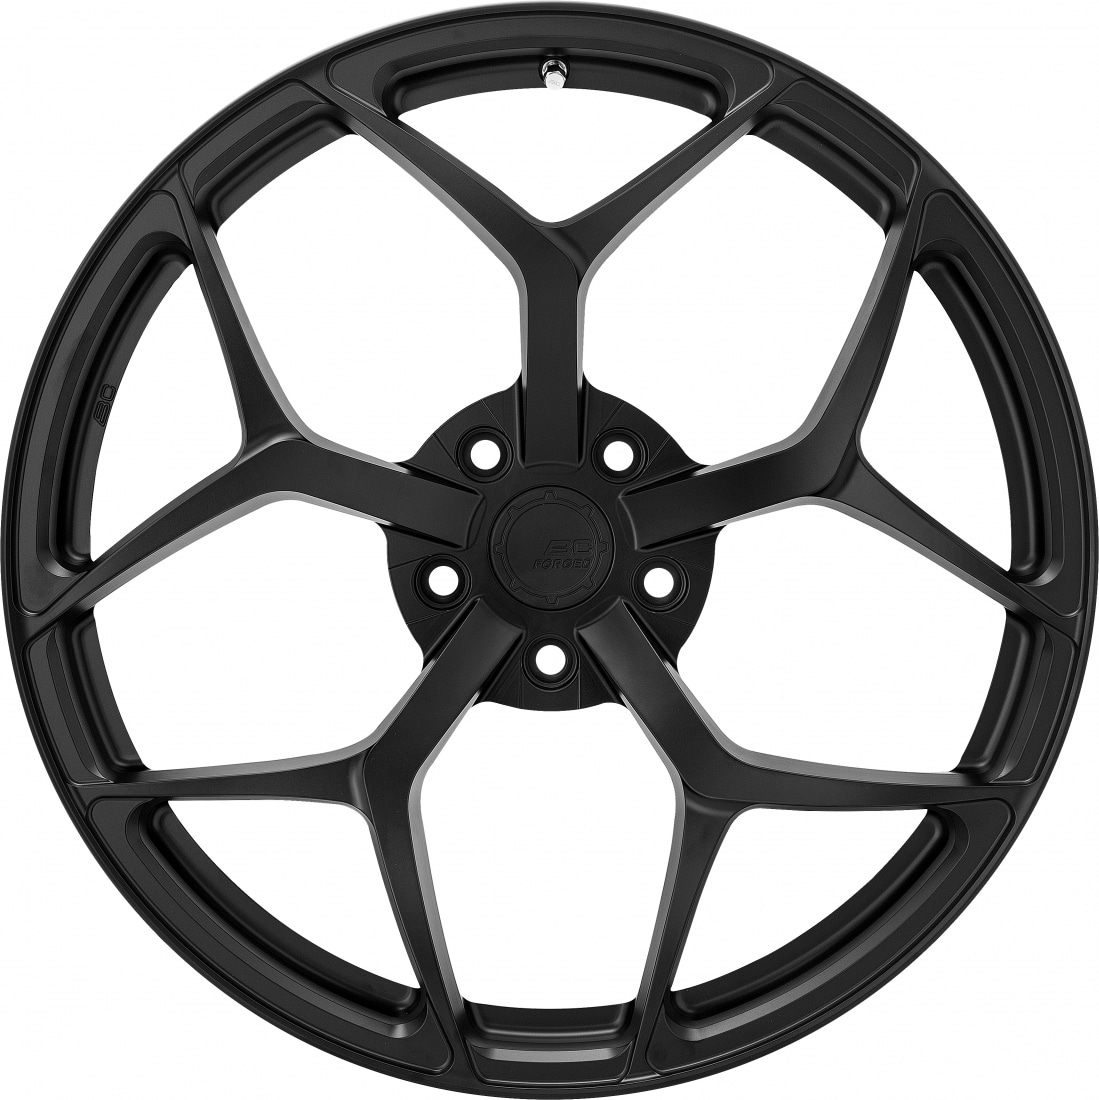 2020-23 BC Forged RZ23 Wheels for C8 Corvette, Set of 4